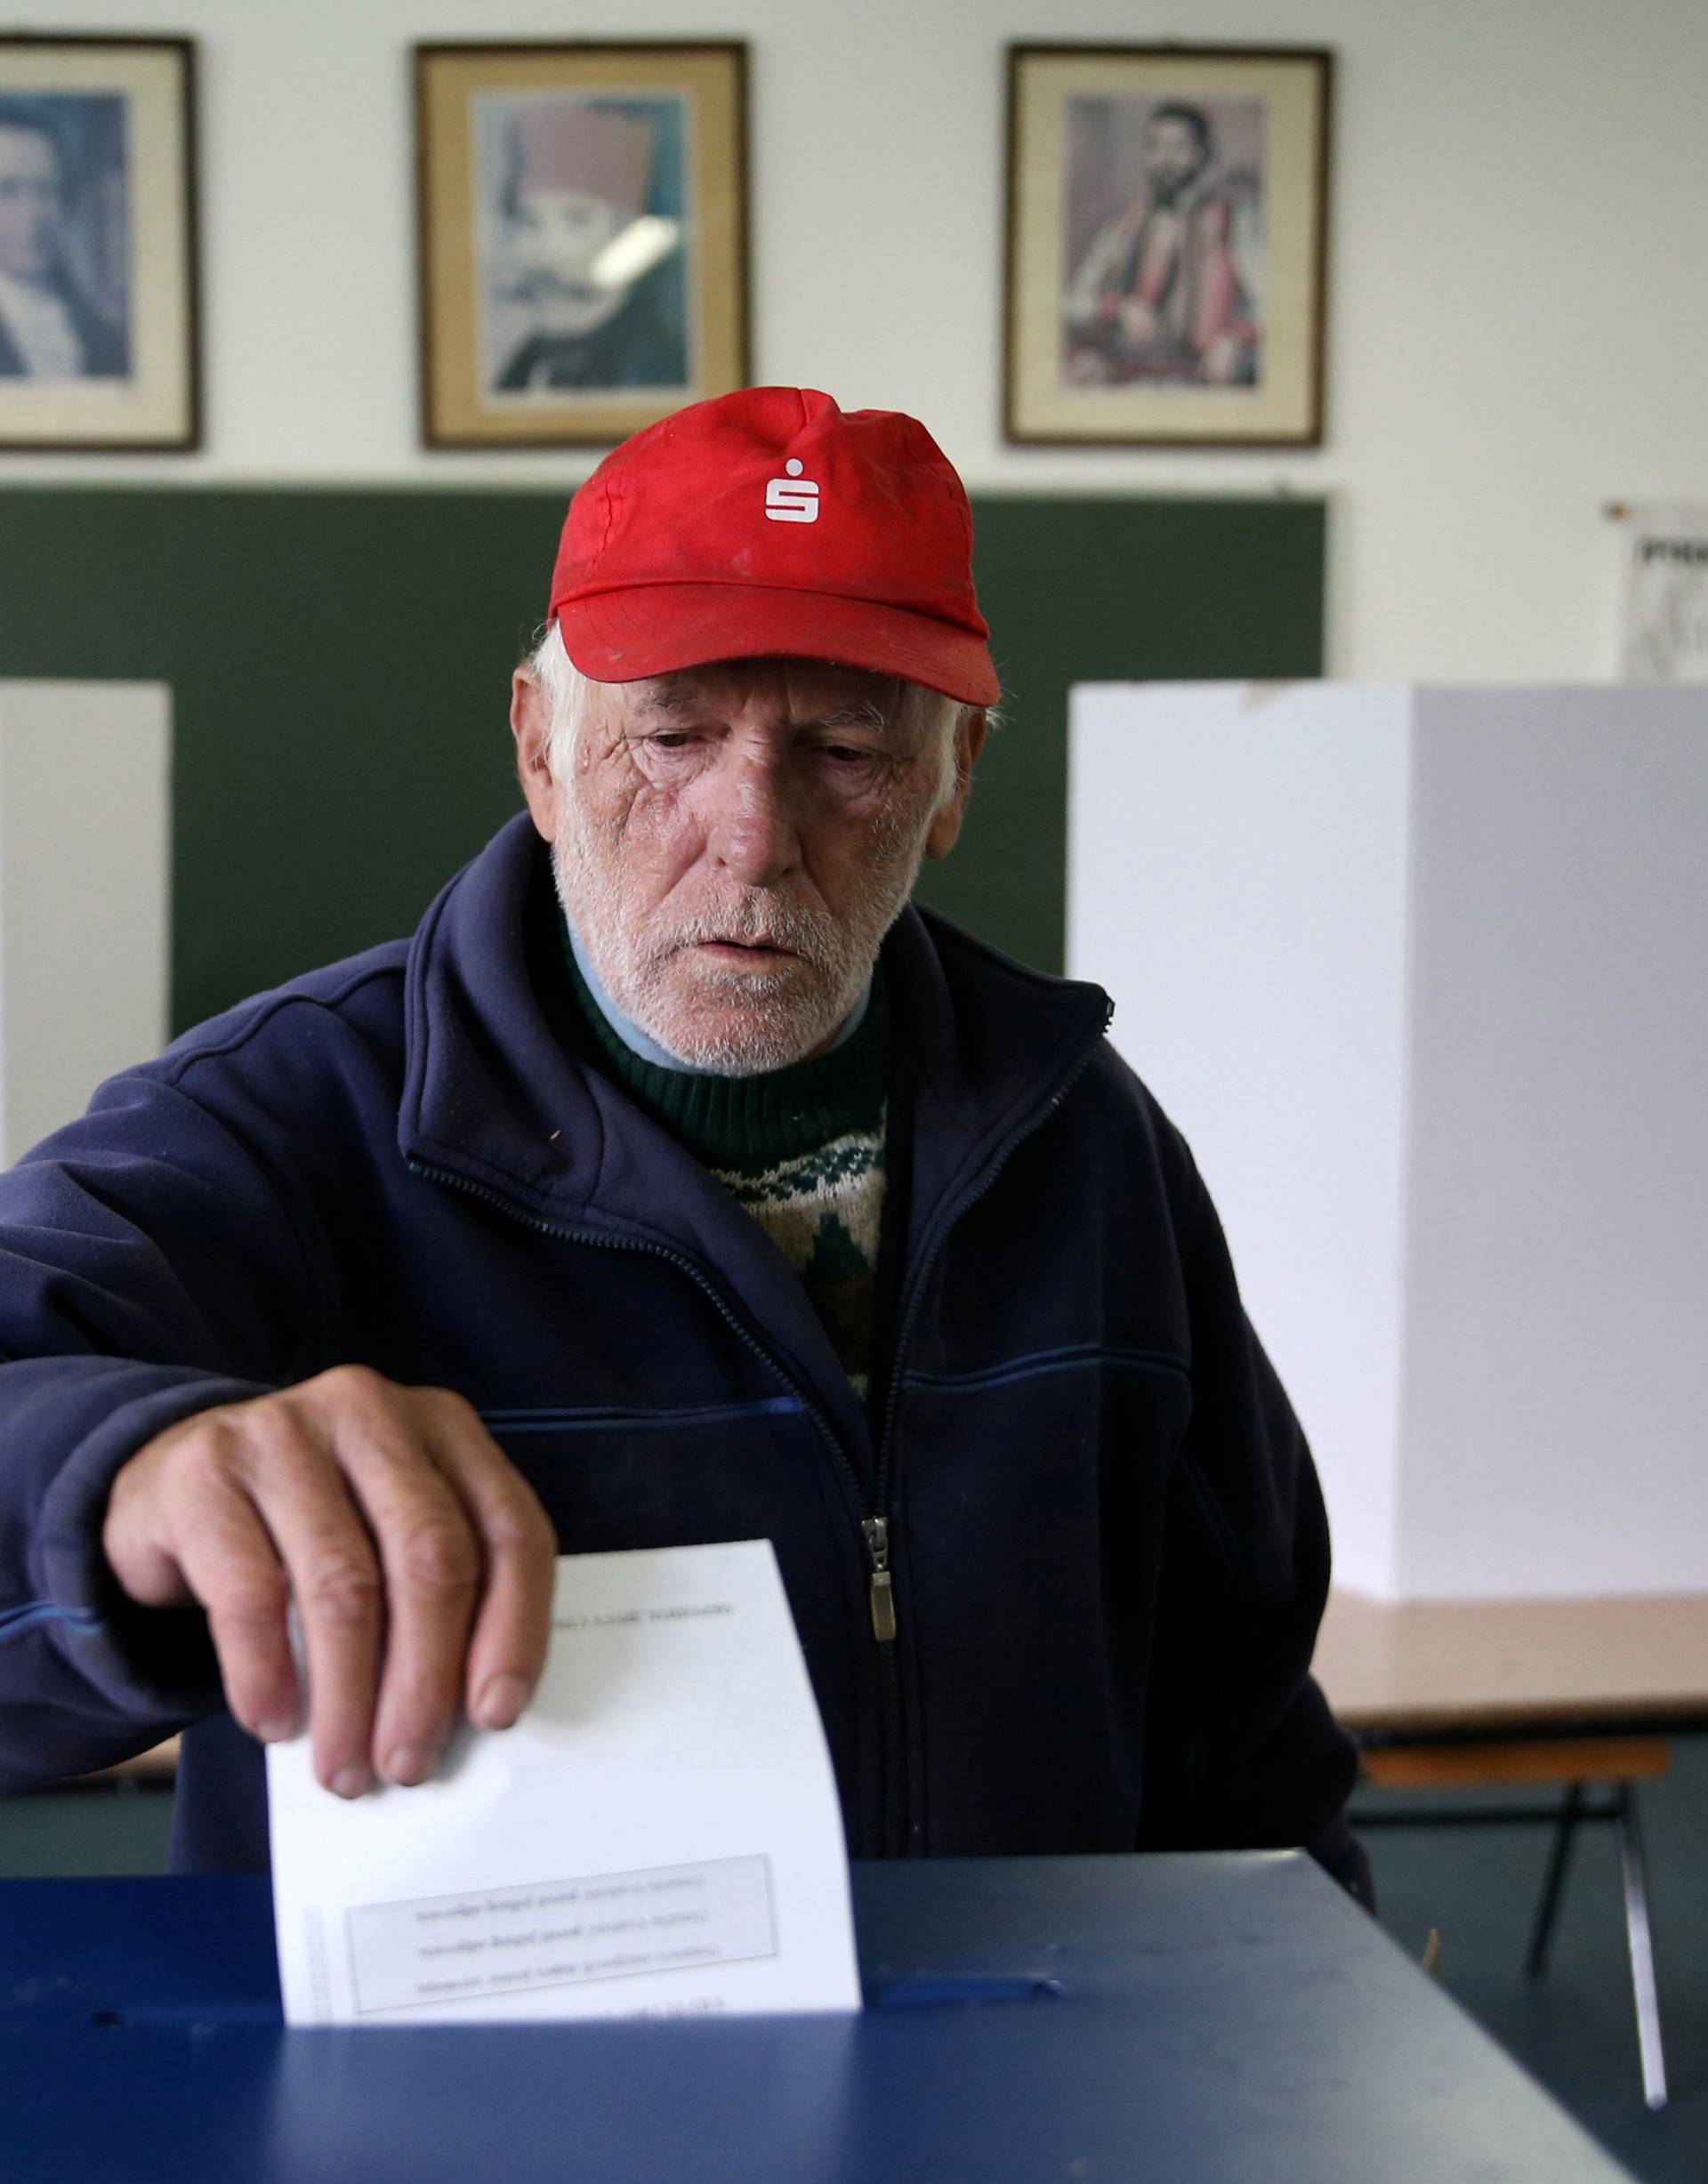 A man votes during a referendum on "Statehood Day" in Laktasi 